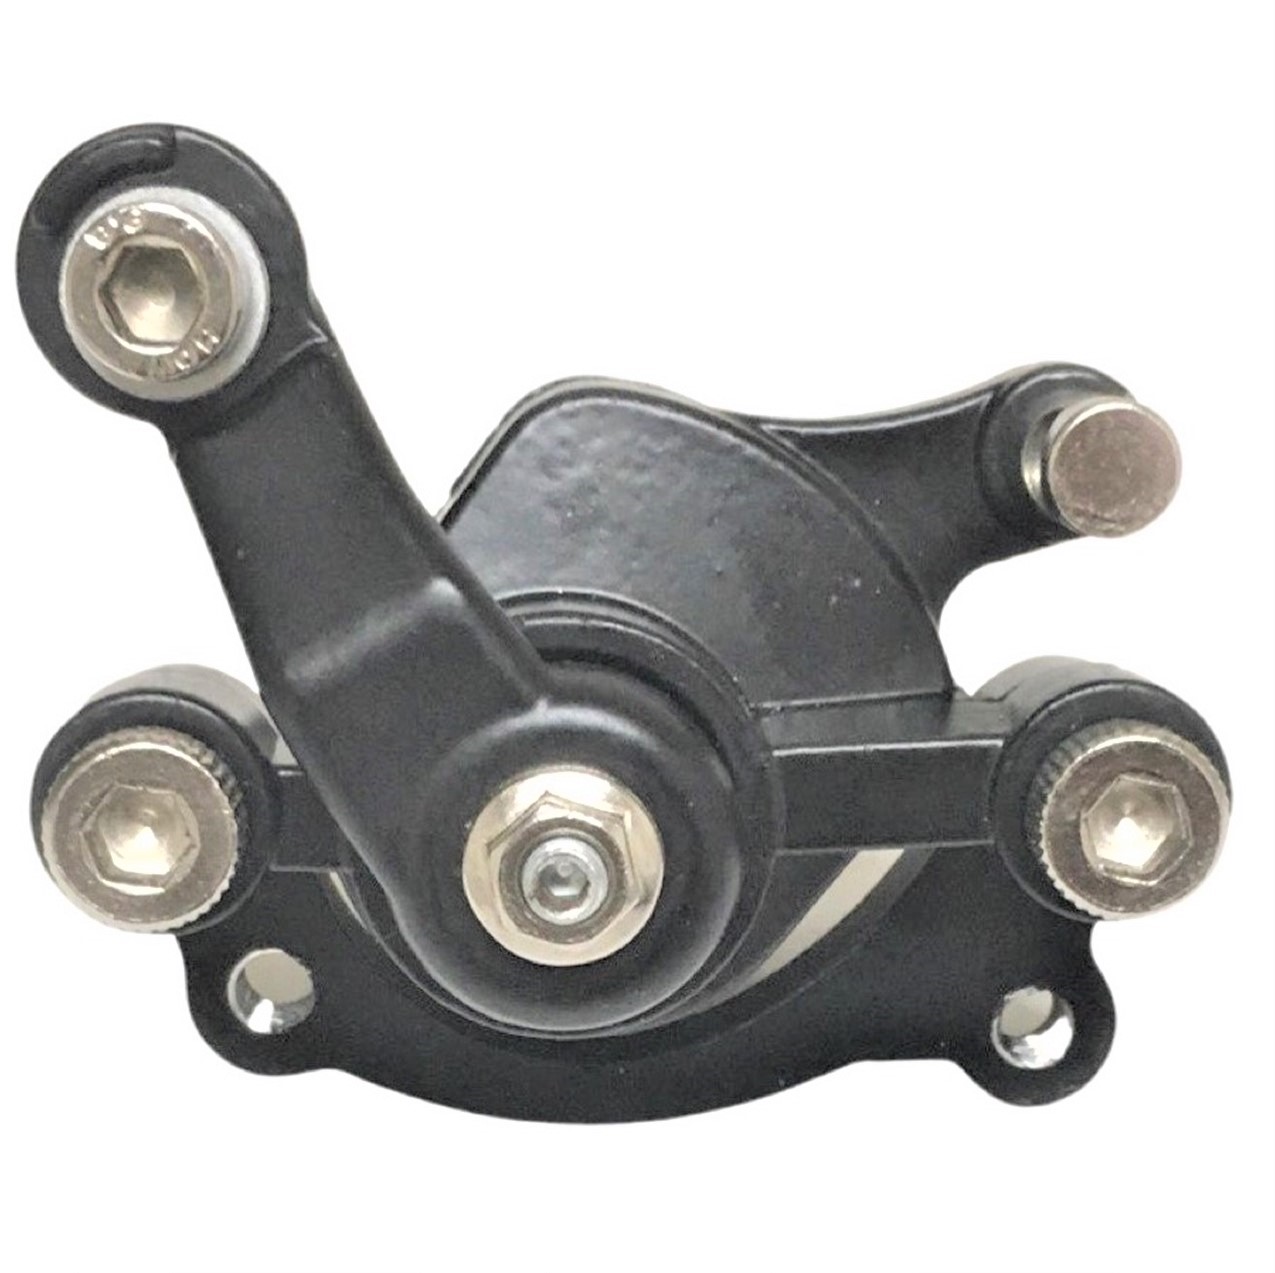 Manual Brake Caliper - Fits Many Minibikes and GoKarts Bolts c/c=51mm Comes with Brake Pads